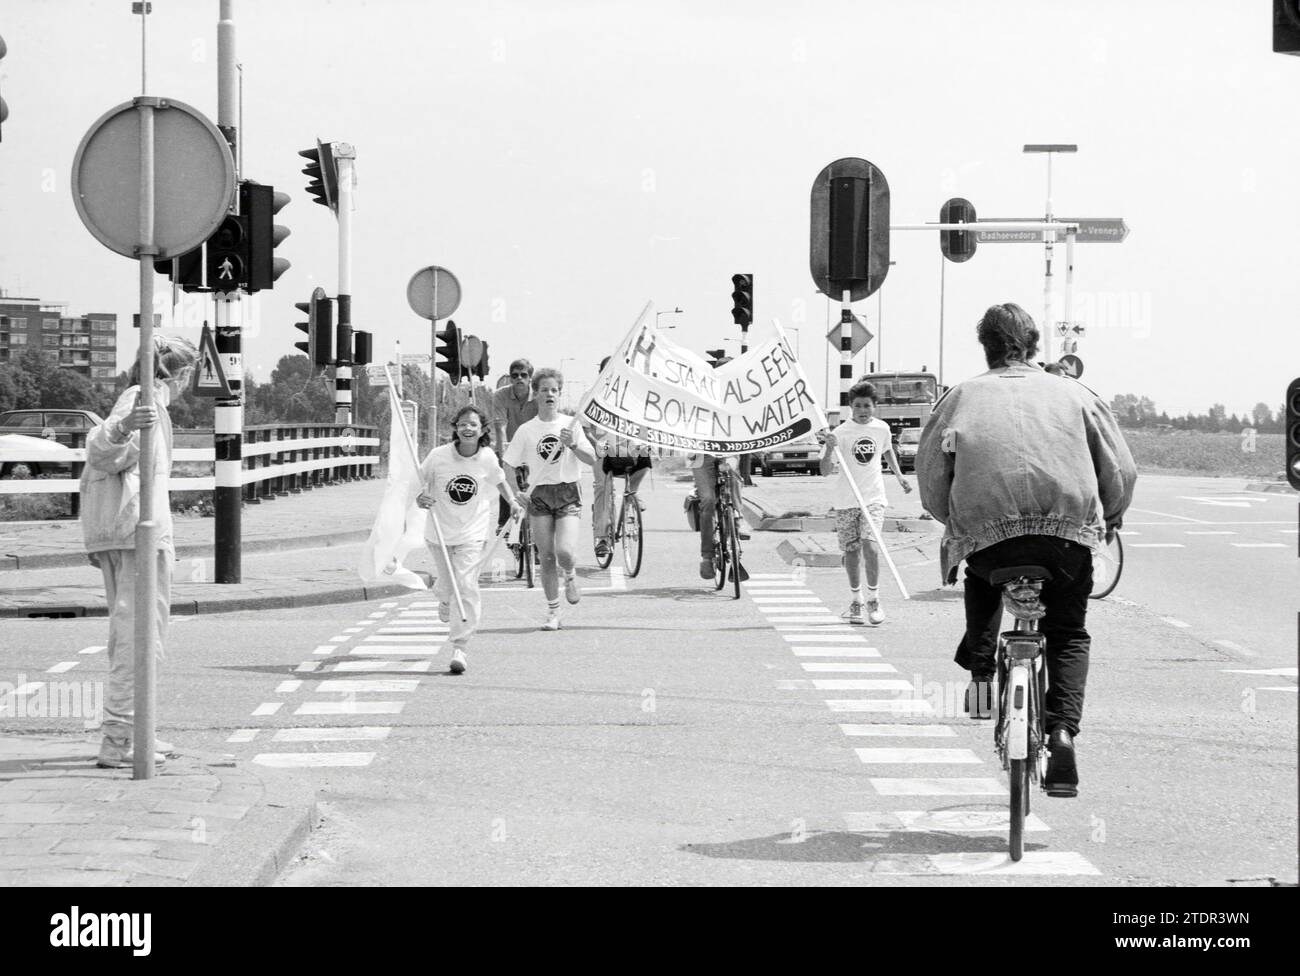 Relay run K.S.H in Hoofddorp, Running, Hoofddorp, The Netherlands, 30-06-1989, Whizgle News from the Past, Tailored for the Future. Explore historical narratives, Dutch The Netherlands agency image with a modern perspective, bridging the gap between yesterday's events and tomorrow's insights. A timeless journey shaping the stories that shape our future Stock Photo